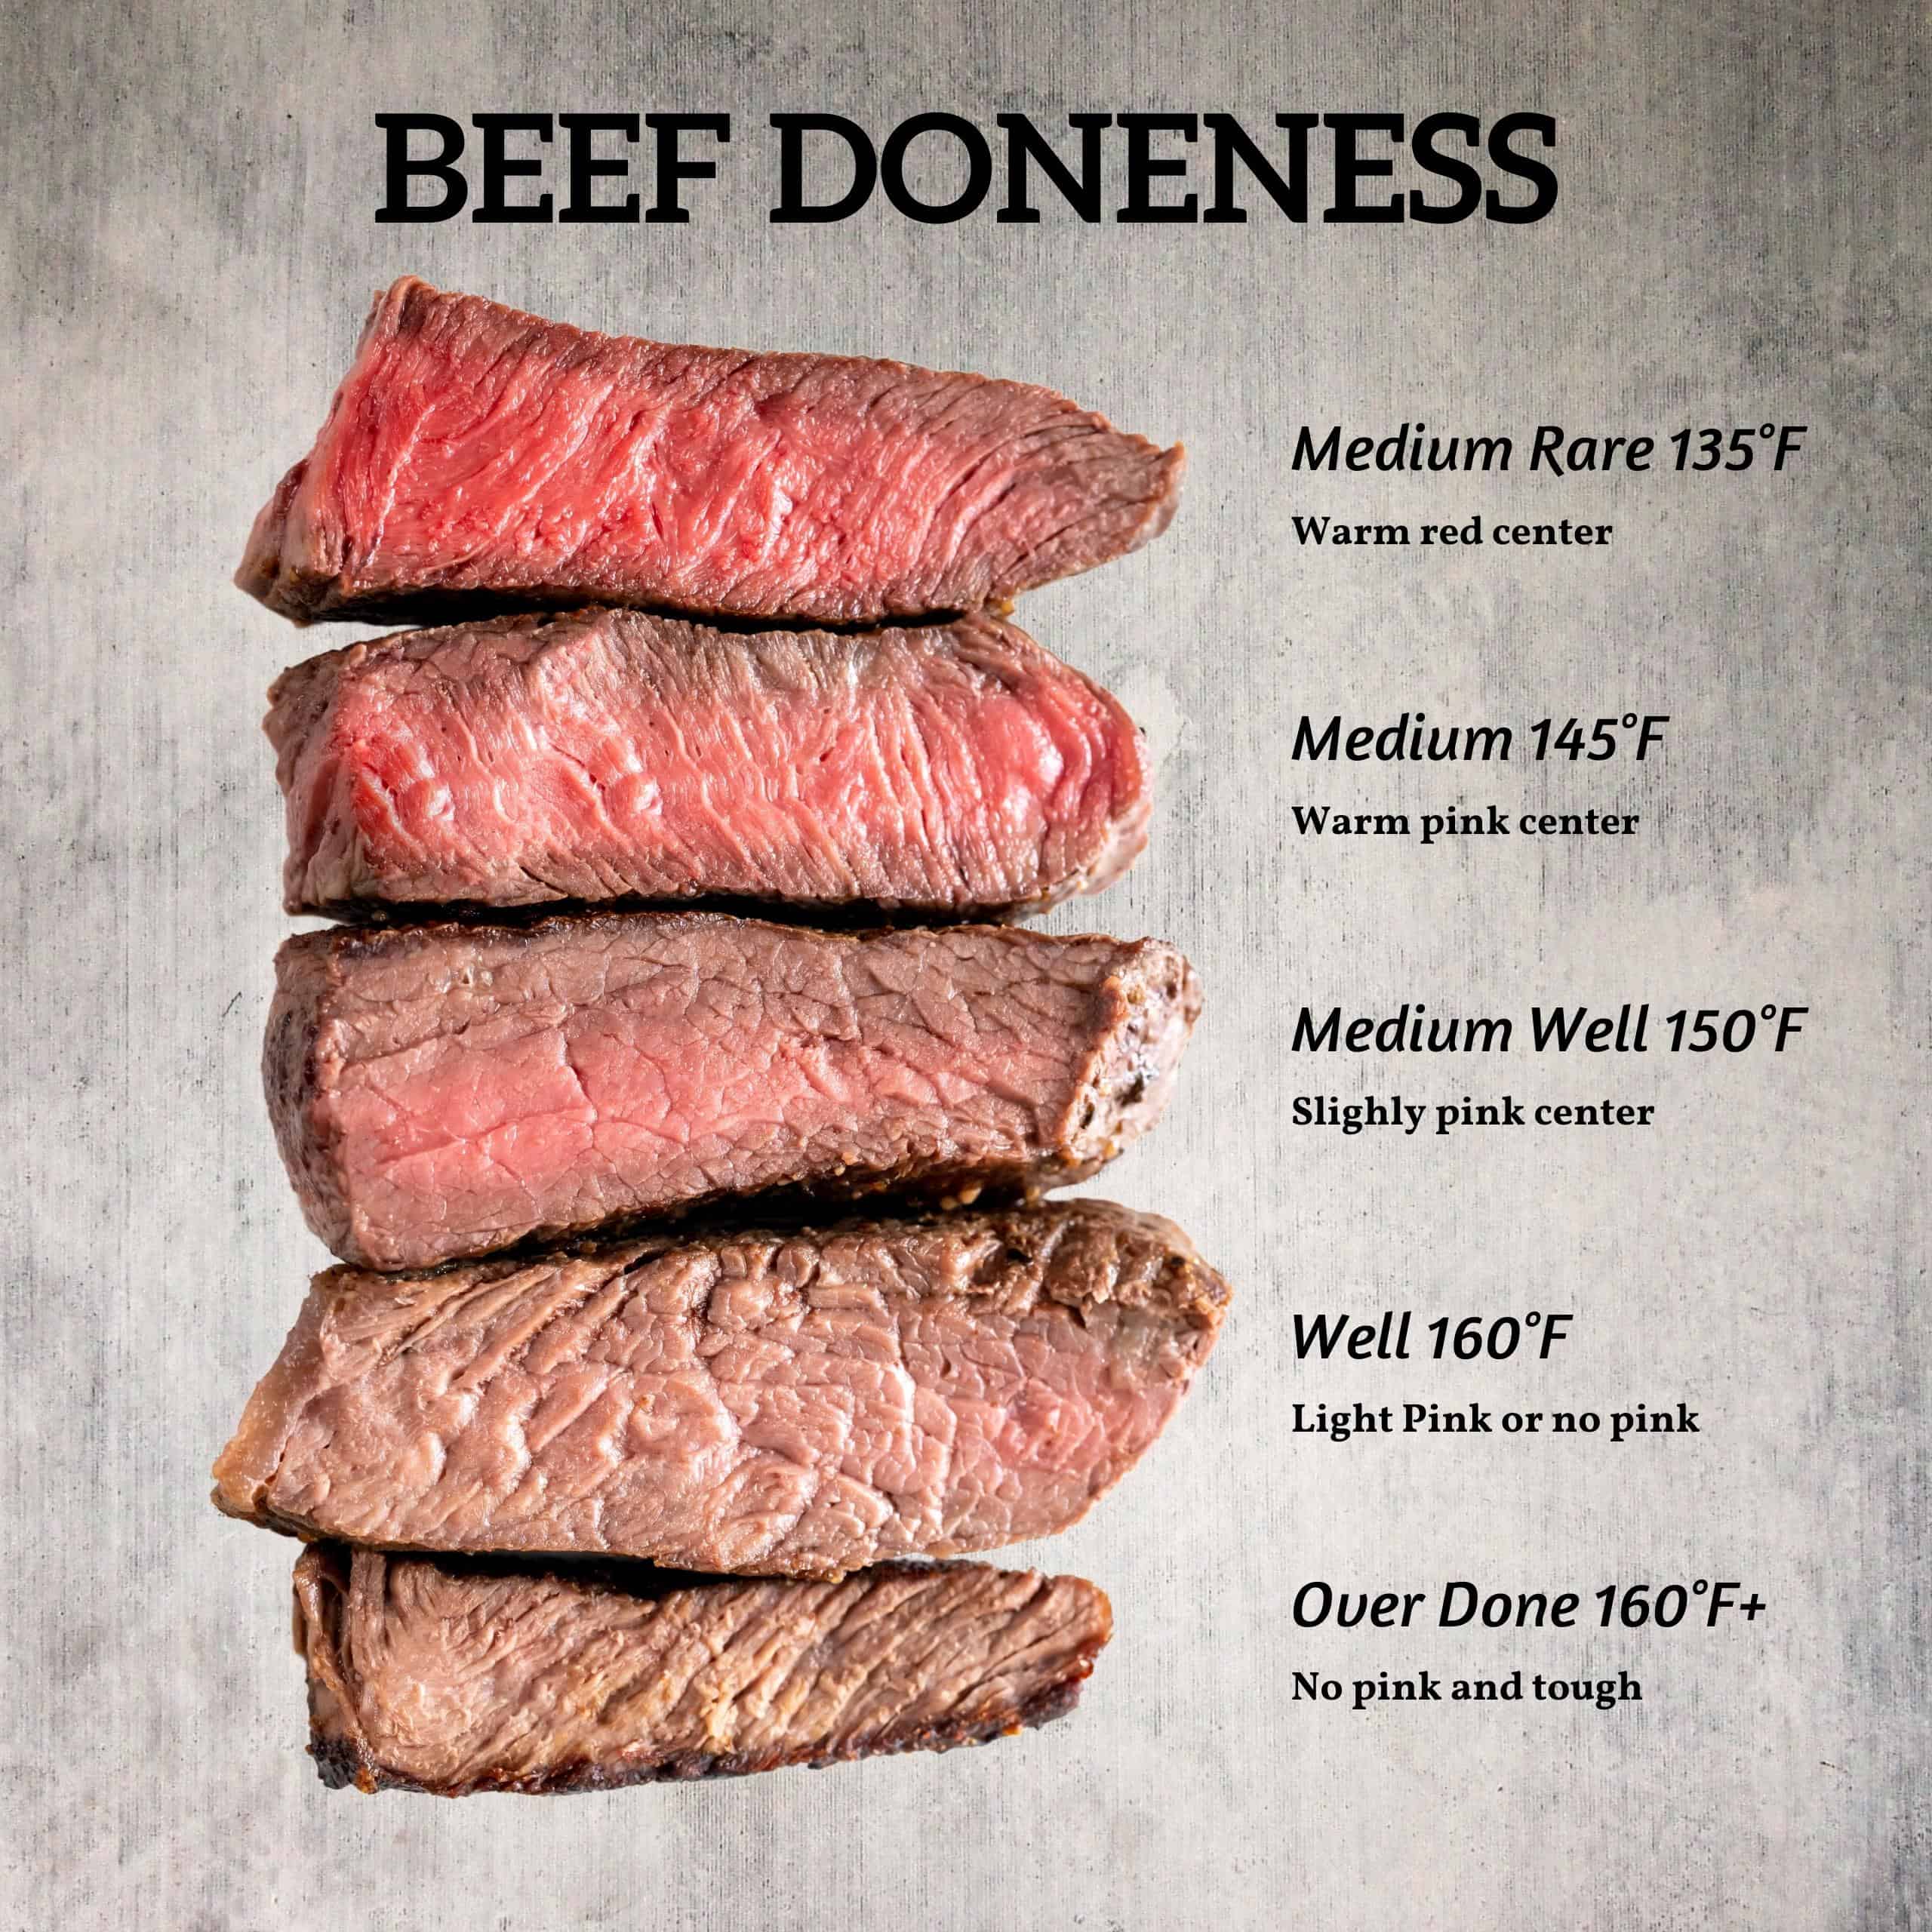 Proper Meat Cooking Temperatures for Best Quality and Food Safety